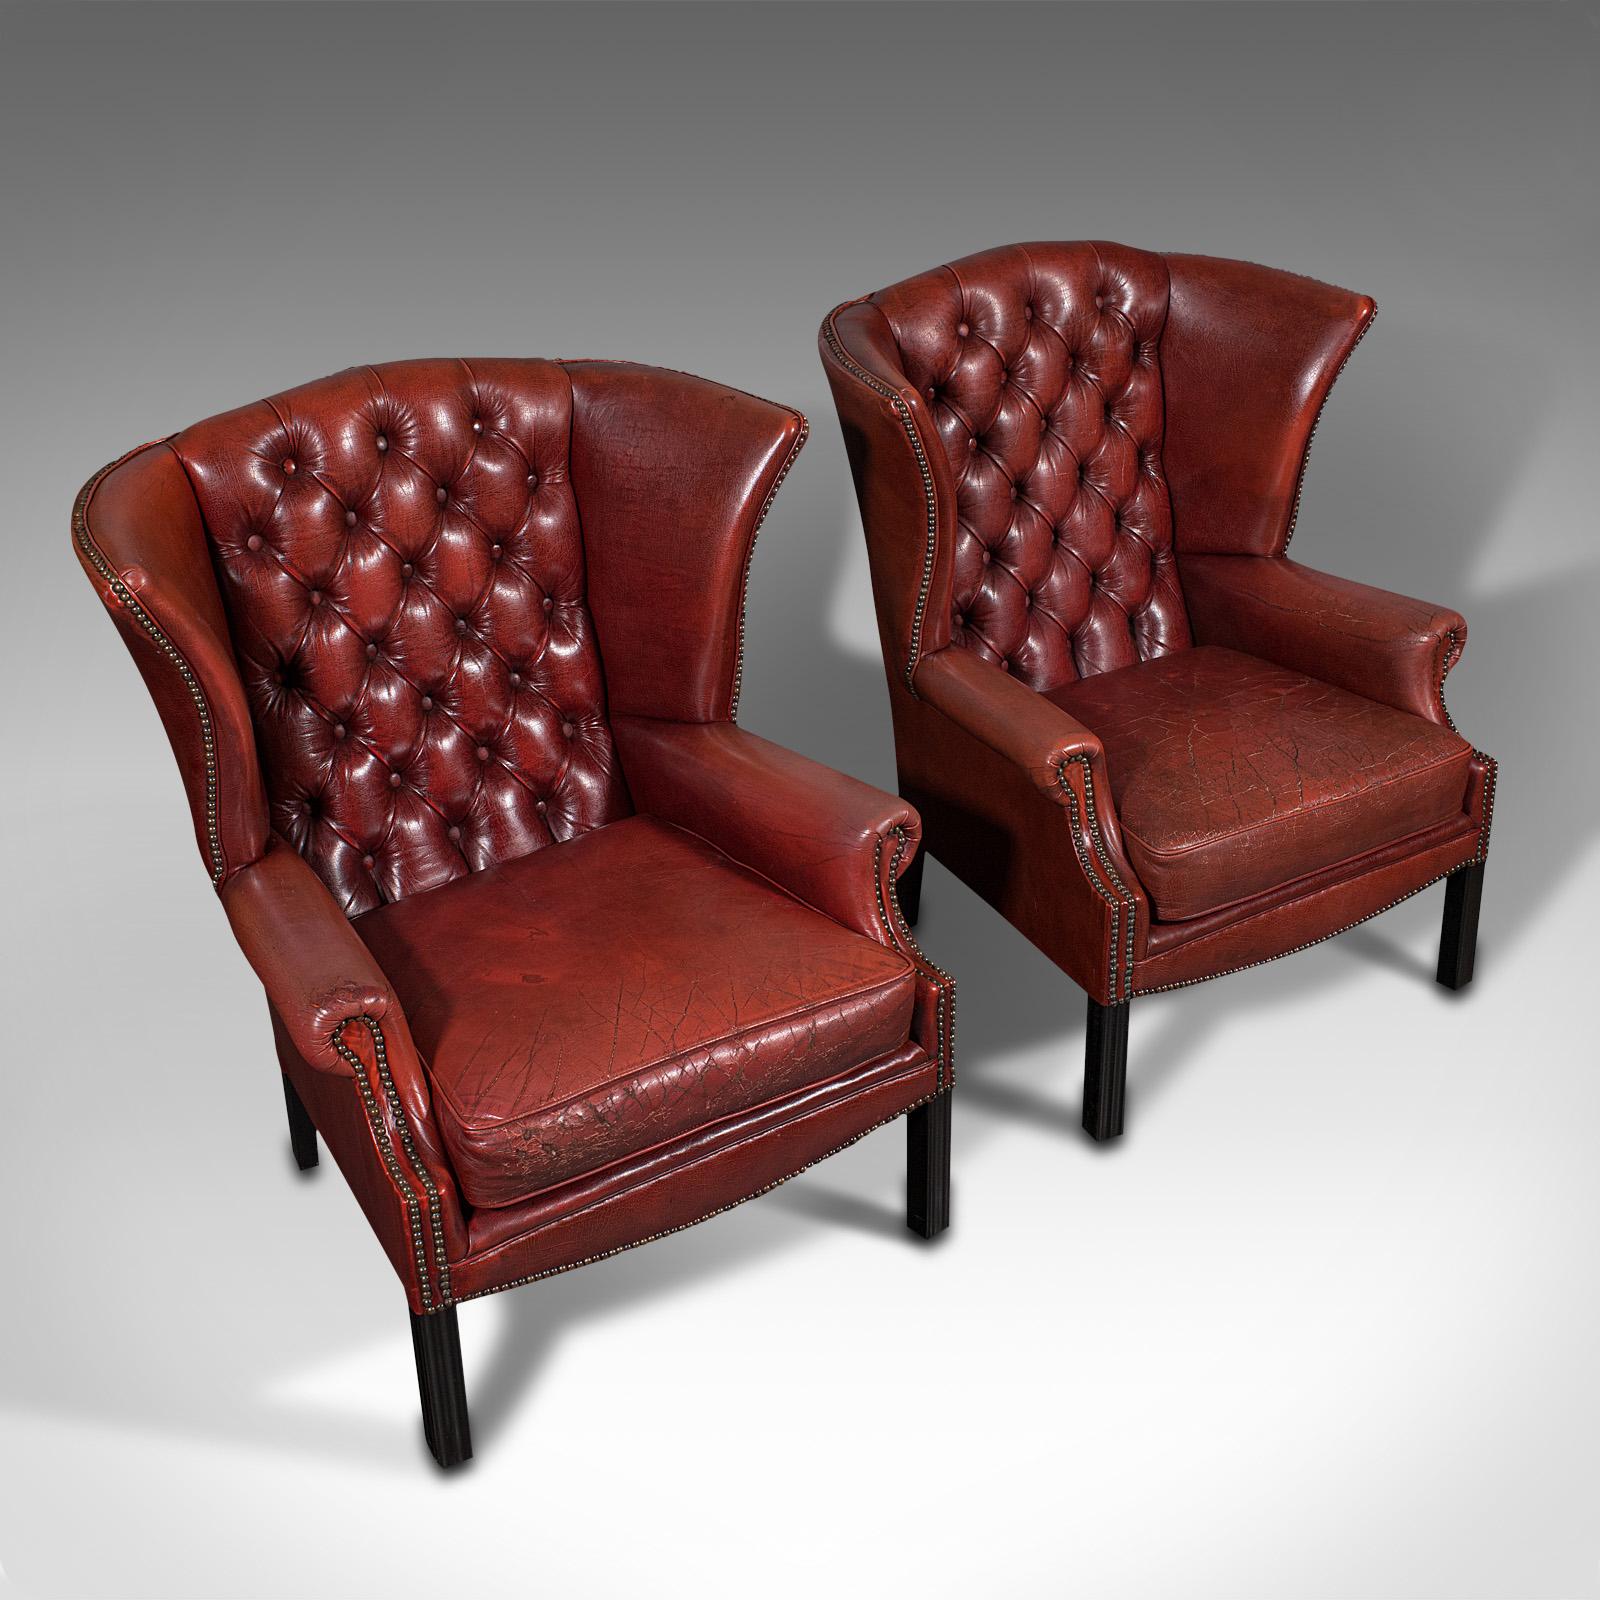 20th Century Pair of Vintage Clubhouse Wingback Chairs, English, Leather, Armchair, C.1950 For Sale